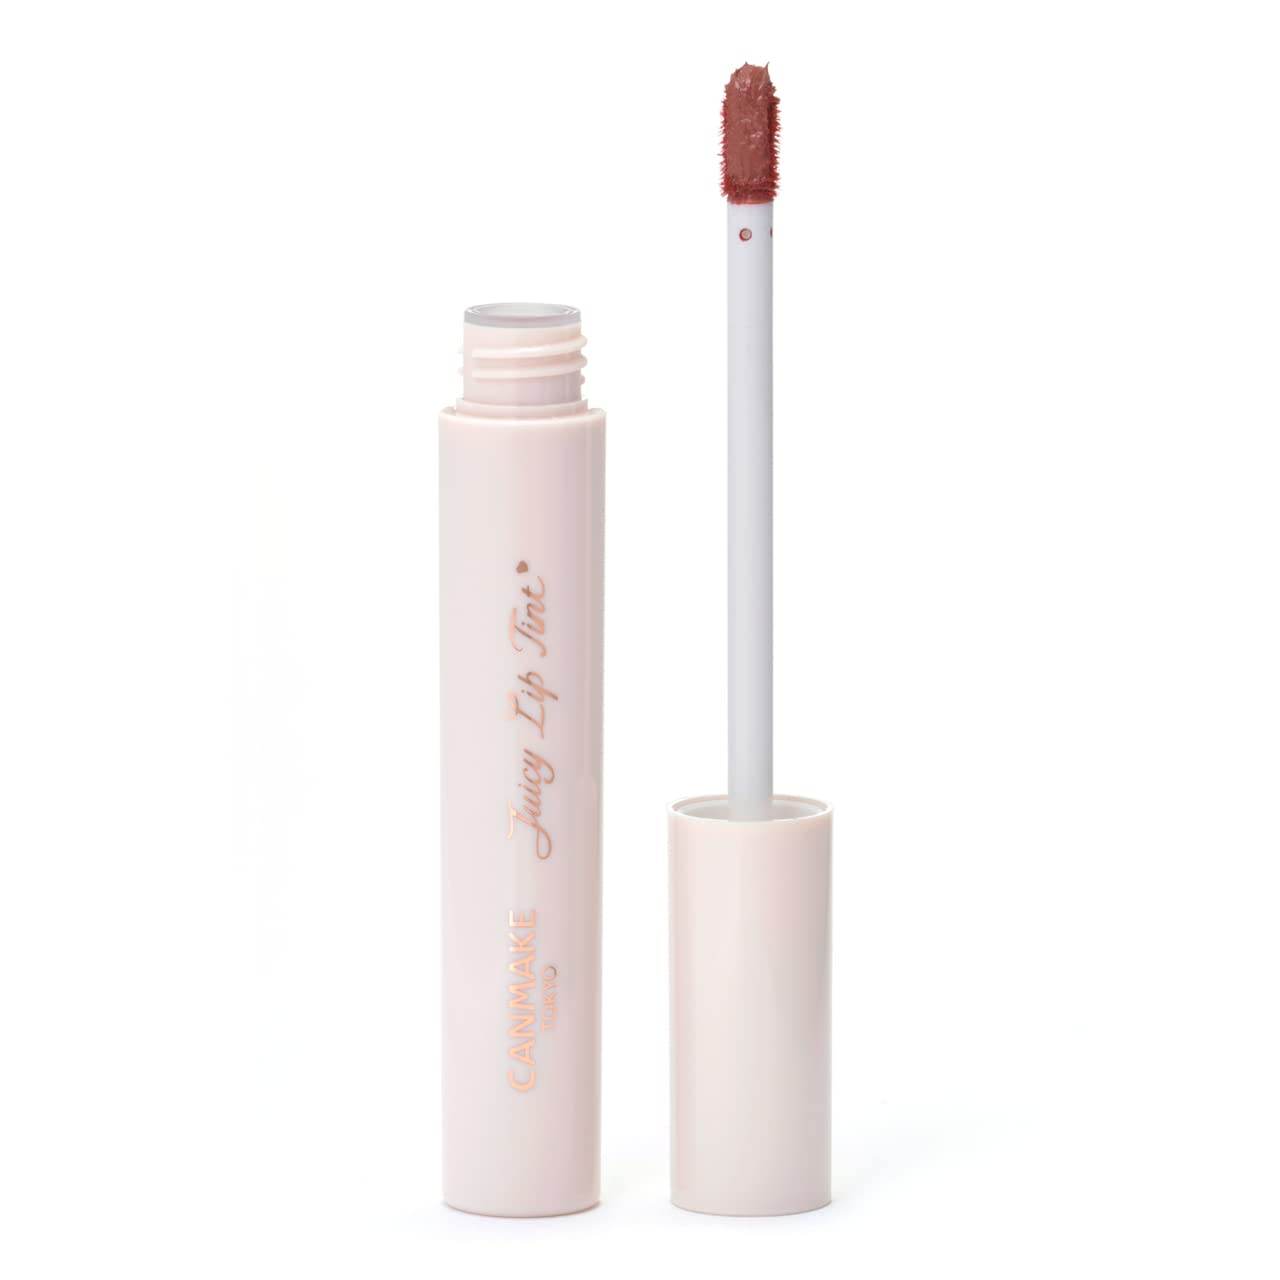 Canmake Juicy Lip Tint 07 Phrase Rose - High Color Gloss Moisturizing Long - lasting